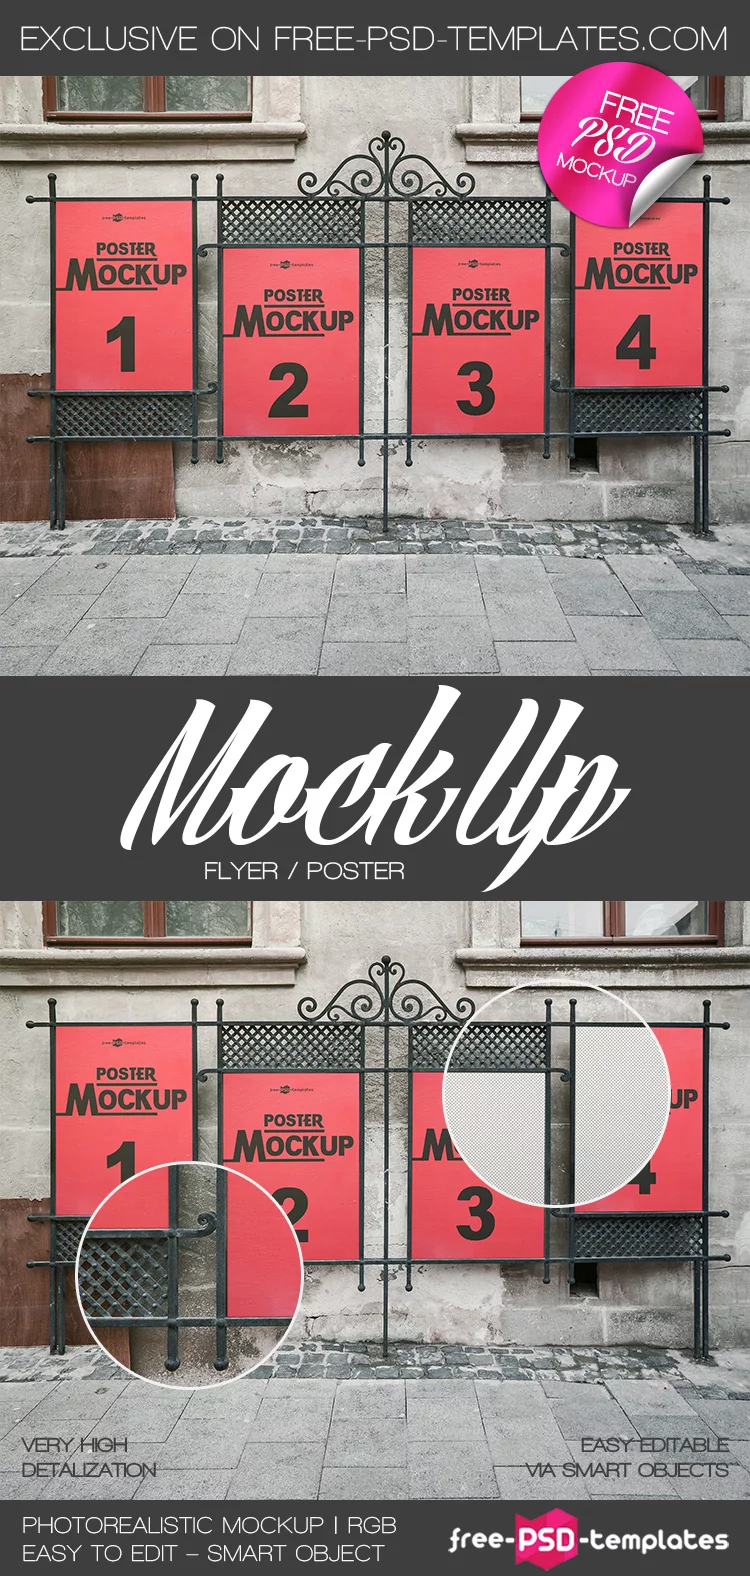 Free Flyer / Poster Mock-up in PSD